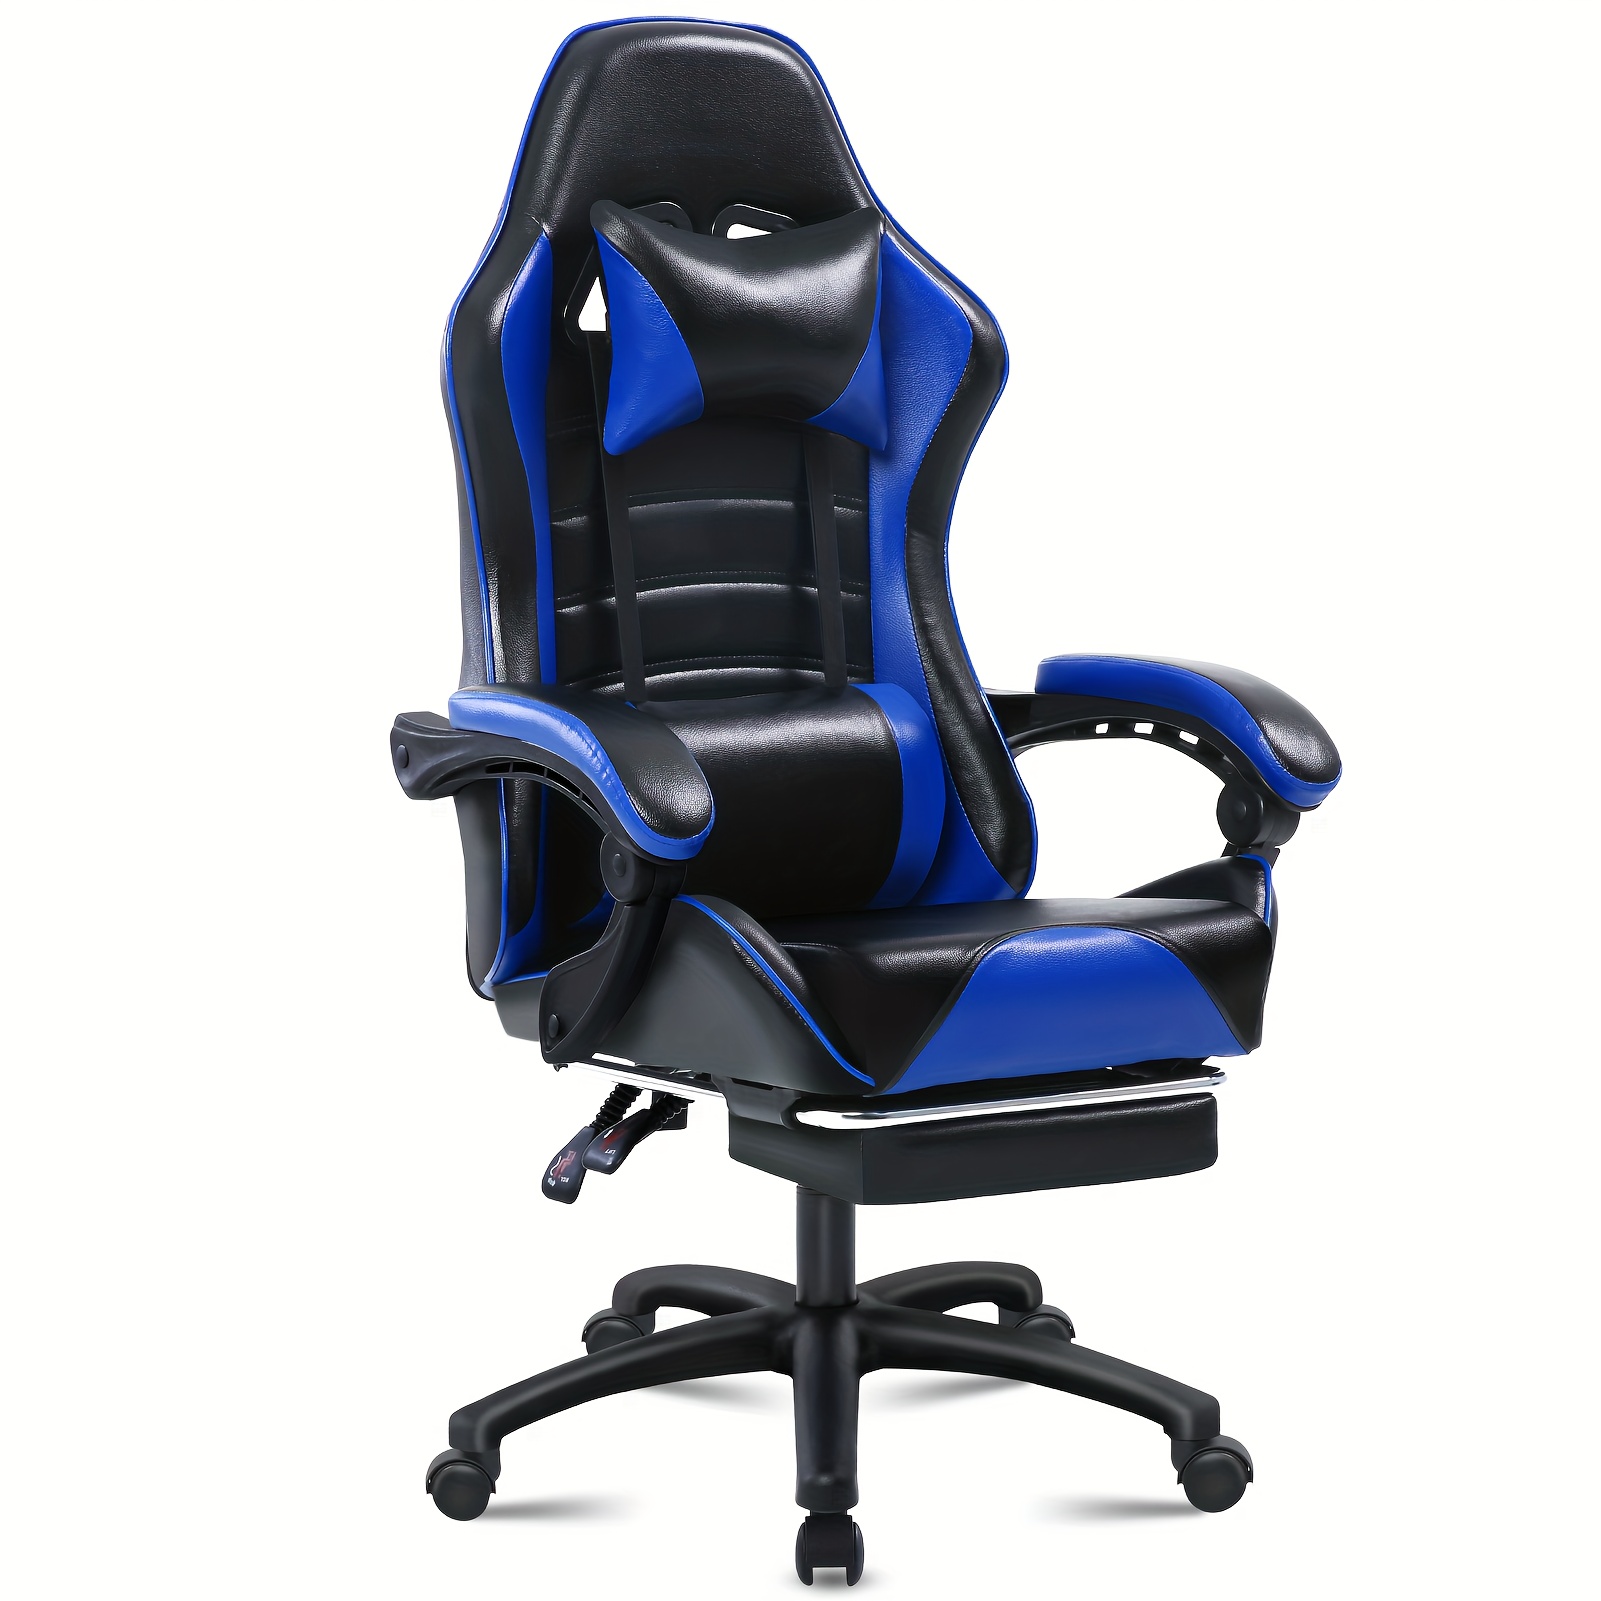 

Ergonomic Gaming Chair With Footrest, Pu Leather For Adults, Reclining Gamer Chair Office Chair With Lumbar Support, Comfortable Computer Chair For Heavy People